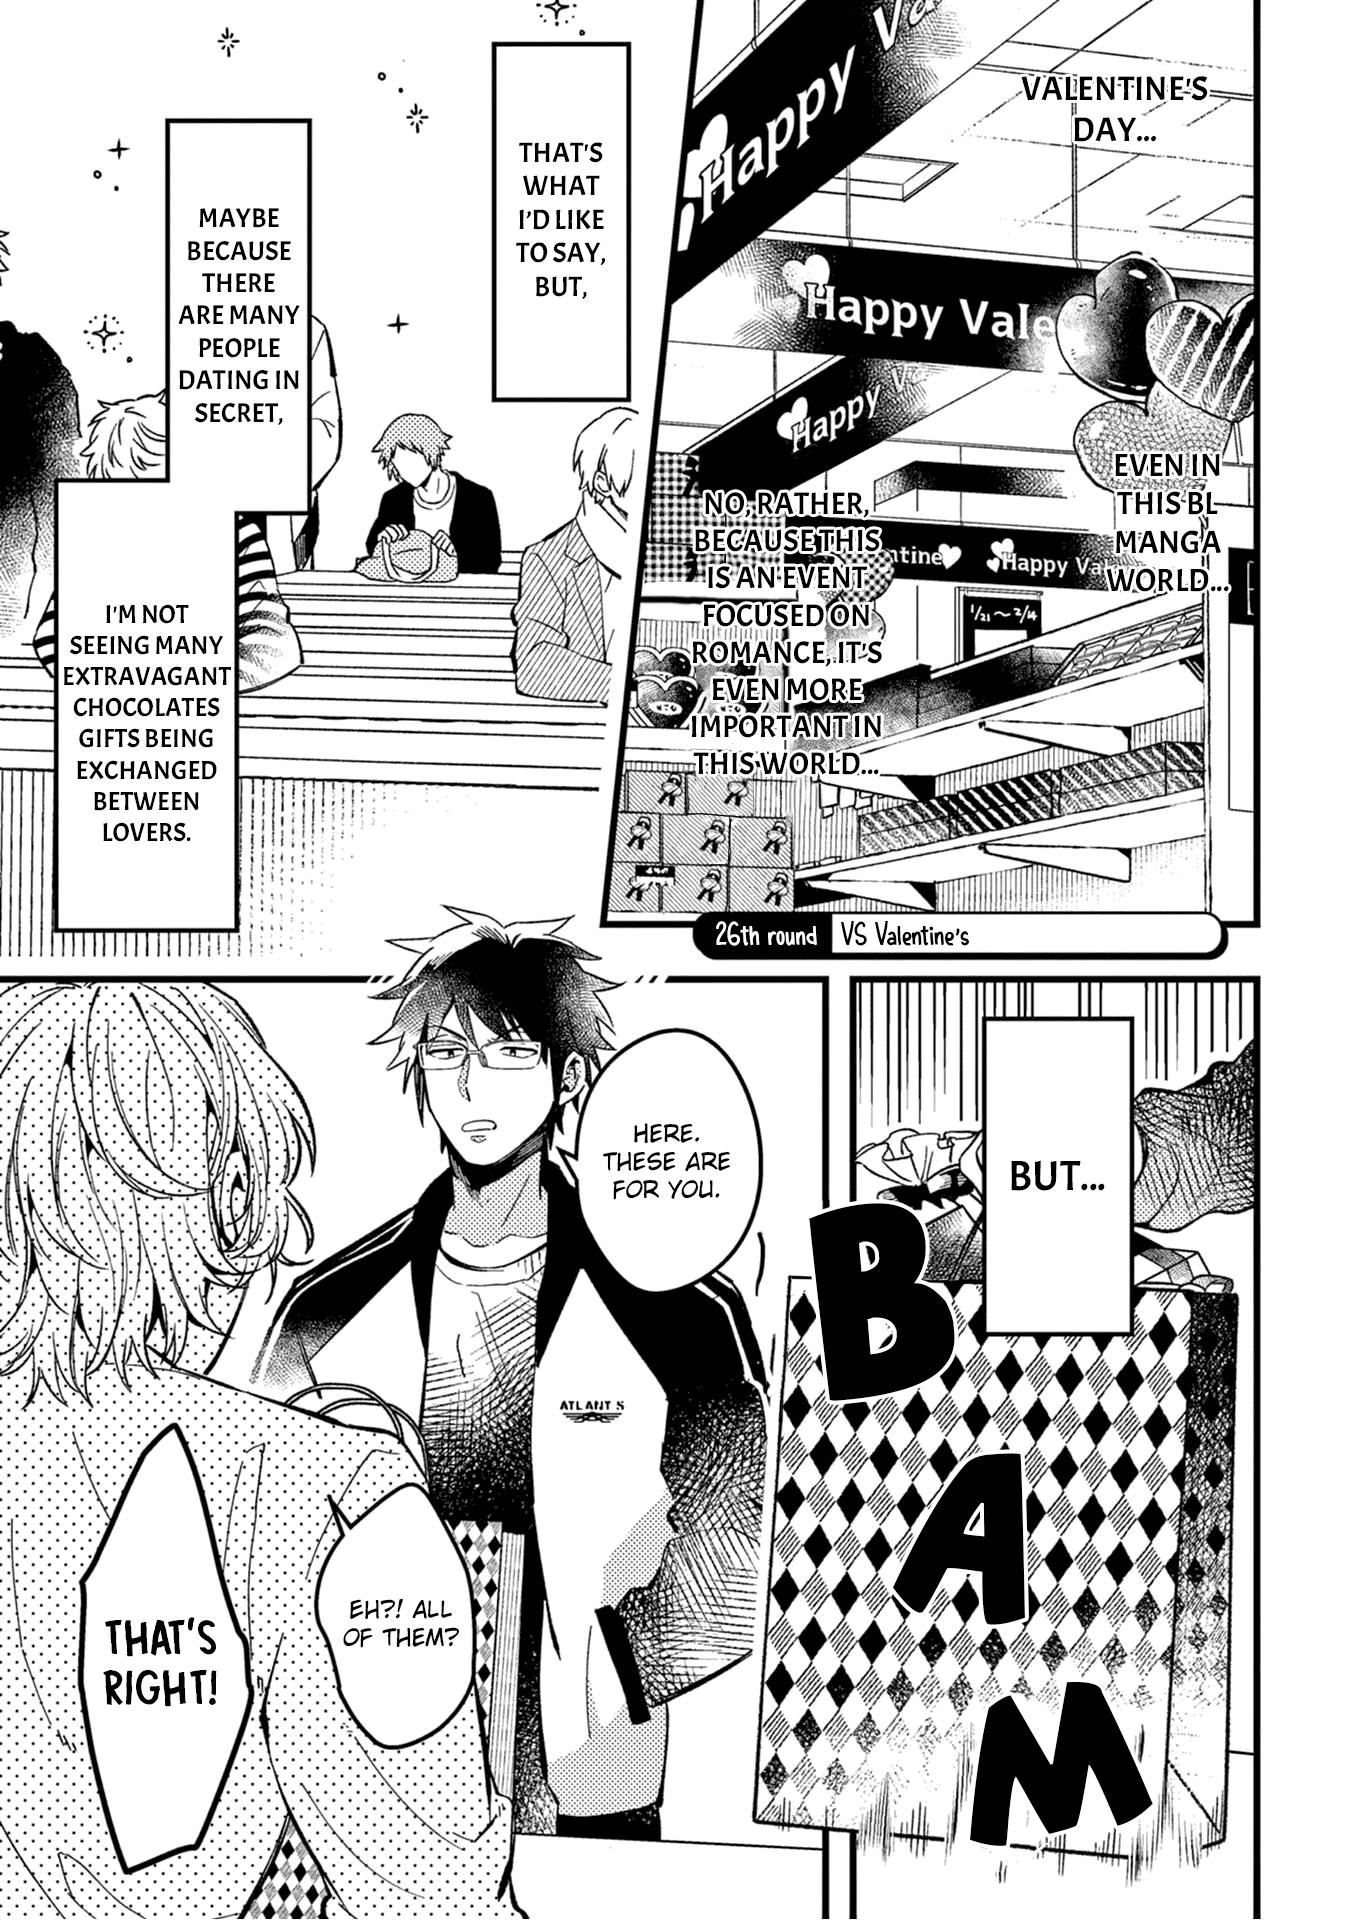 A World Where Everything Definitely Becomes Bl Vs. The Man Who Definitely Doesn't Want To Be In A Bl Vol.2 Chapter 26: Vs Valentine's + Extra - Picture 2